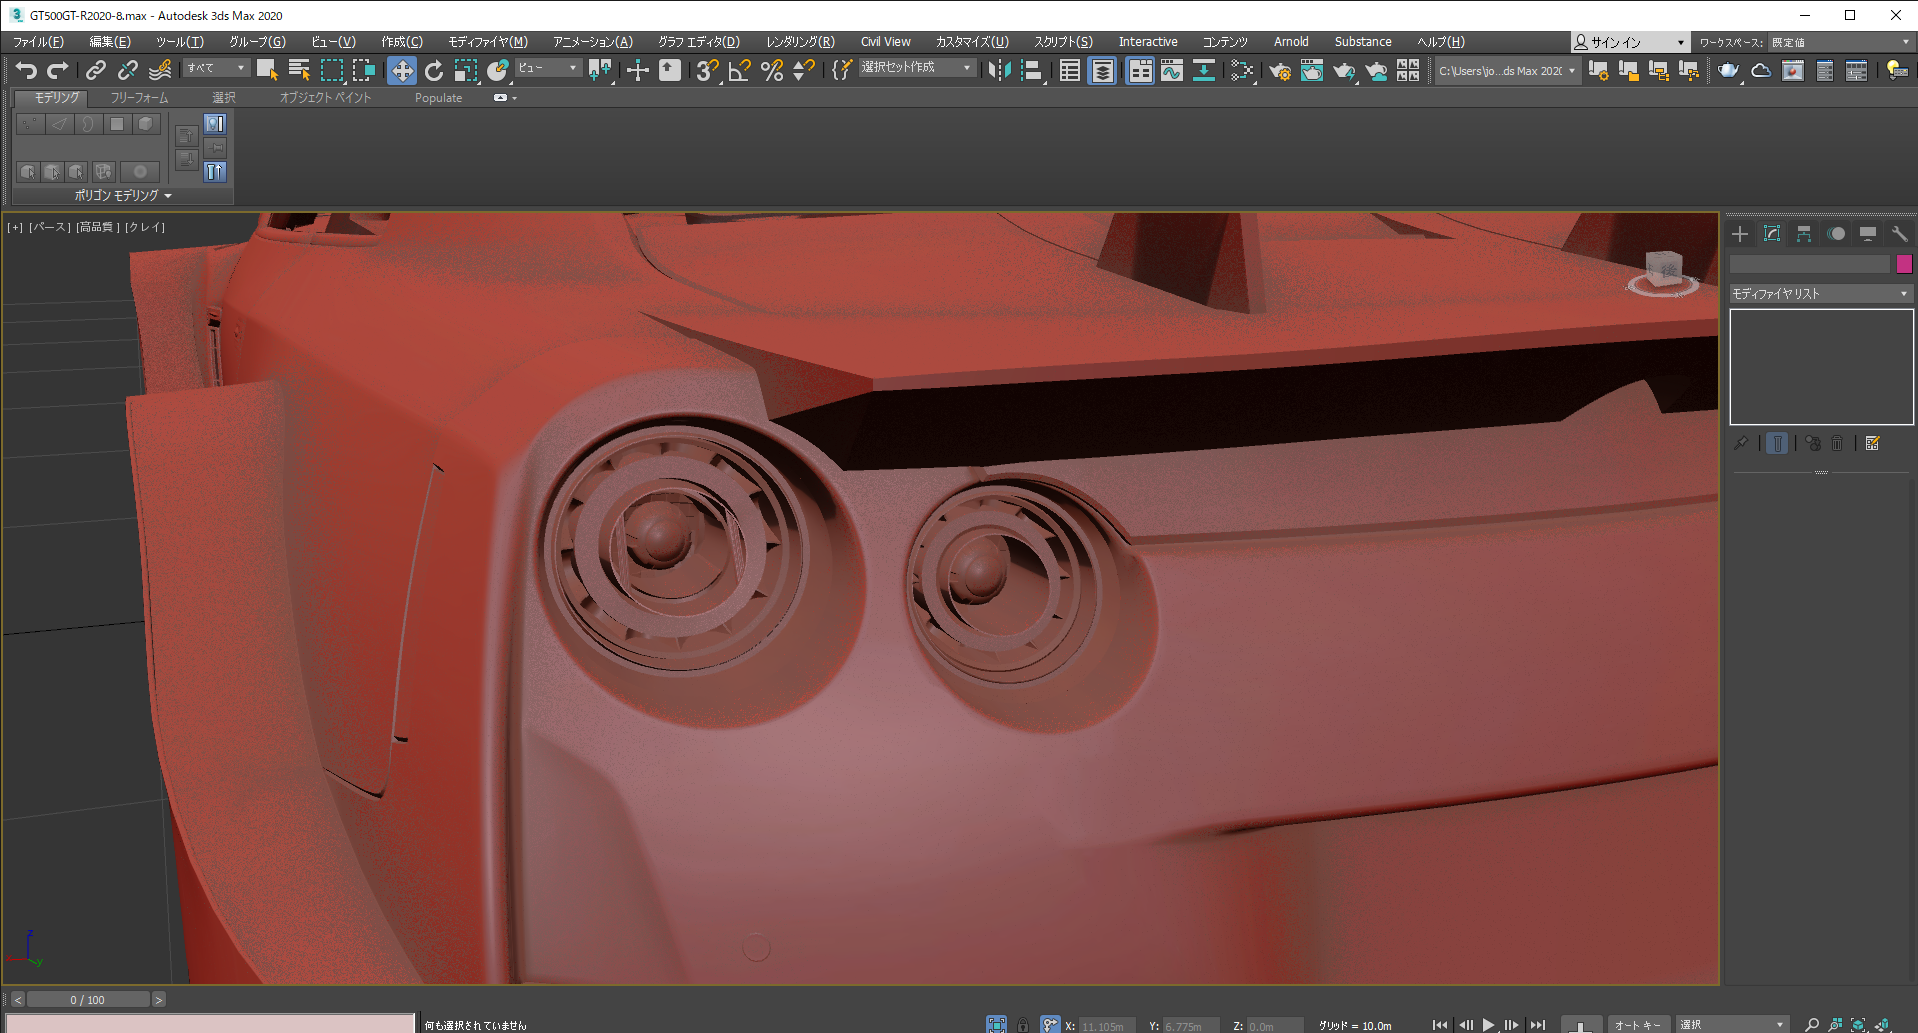 GT500GT-R2020-8.max - Autodesk 3ds Max 2020  2020_03_31 13_07_09.png